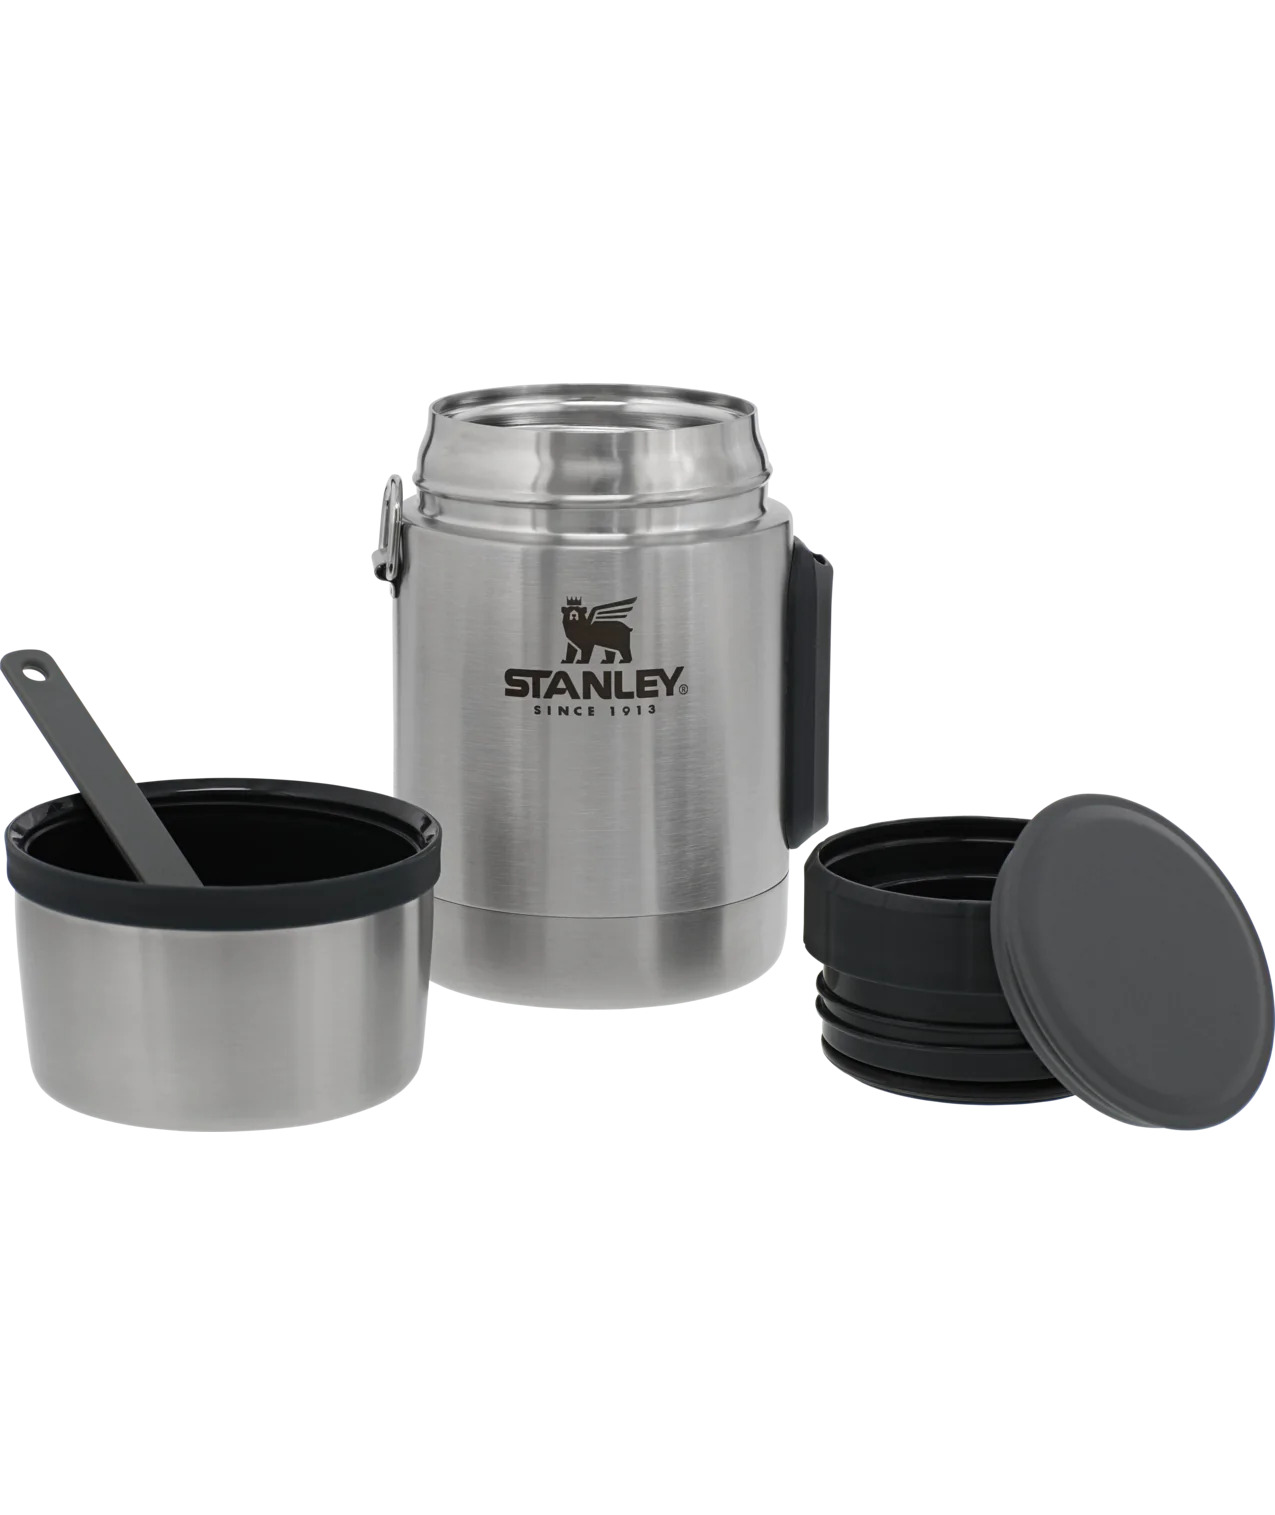 https://layoverstoreth.com/wp-content/uploads/2023/04/B2B_Web_PNG-Adventure-Stainless-Steel-All-in-One-Food-Jar-18oz-Stainless-Steel_1800x1800.jpg